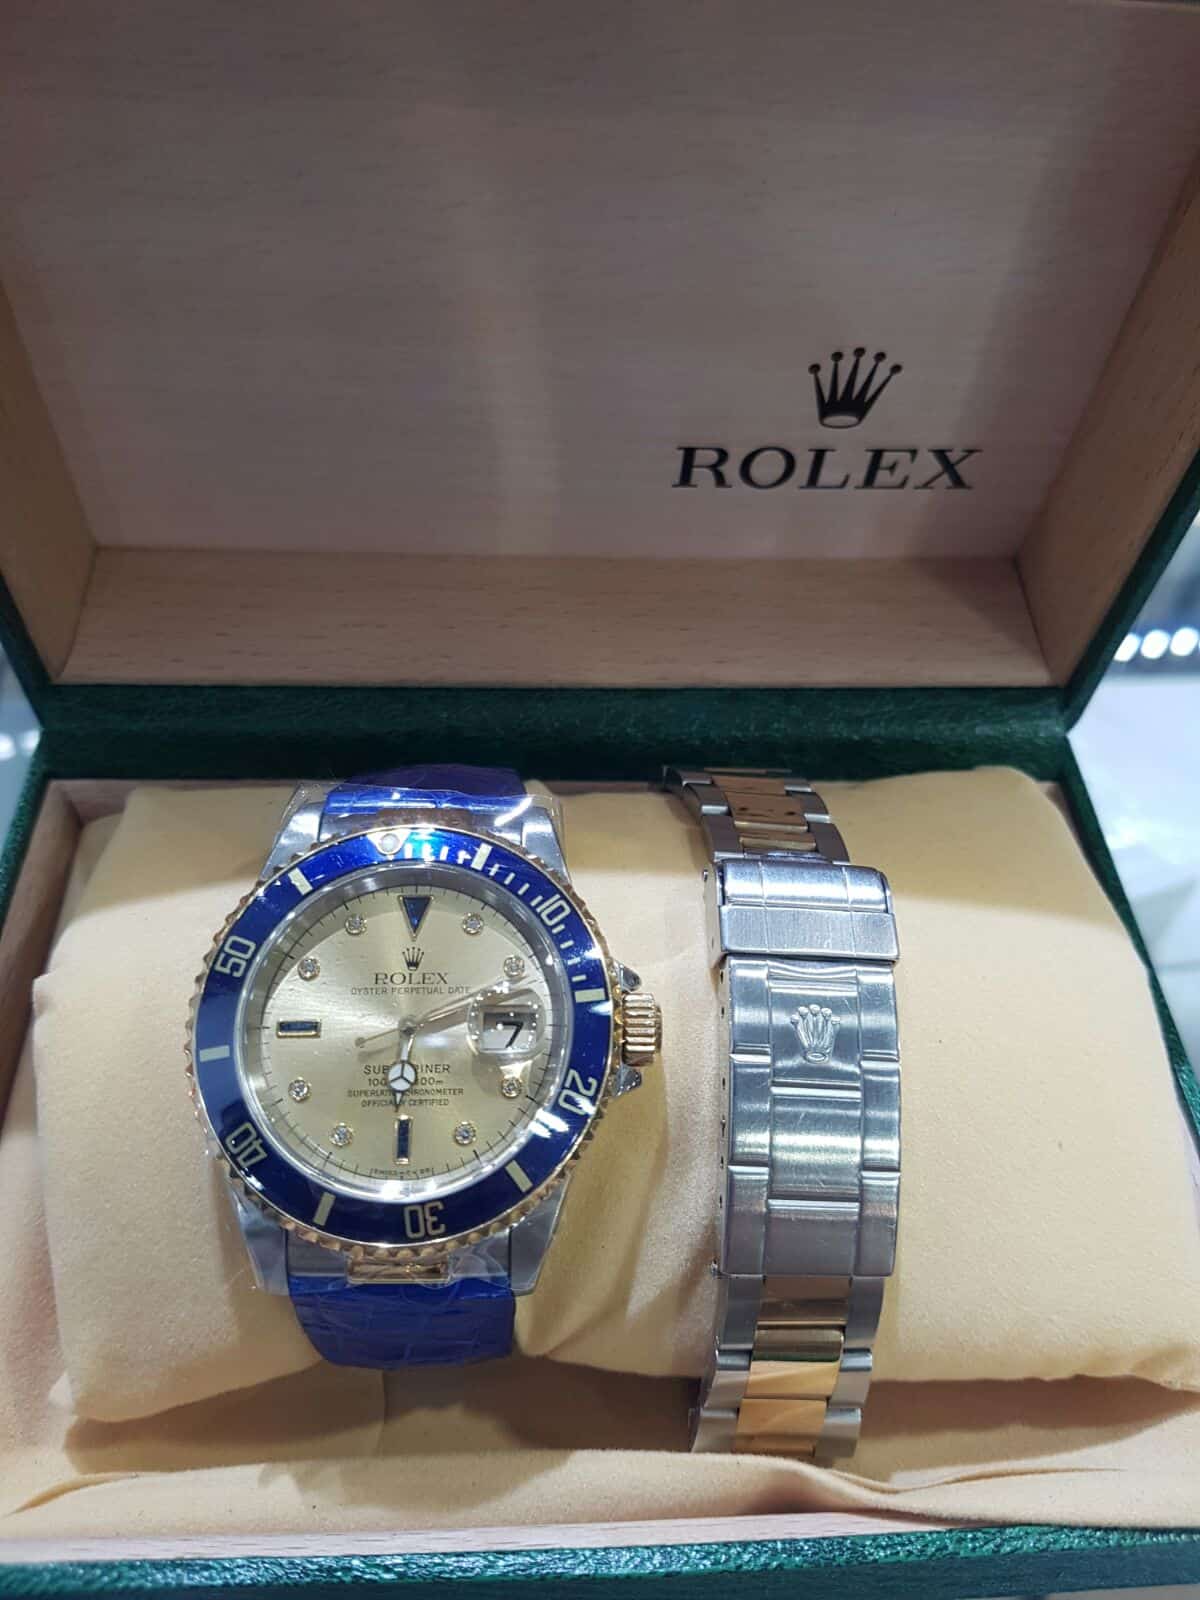 Rolex 16613 Submariner 2 Tone - Buy and Sell used Rolex Watches and ...